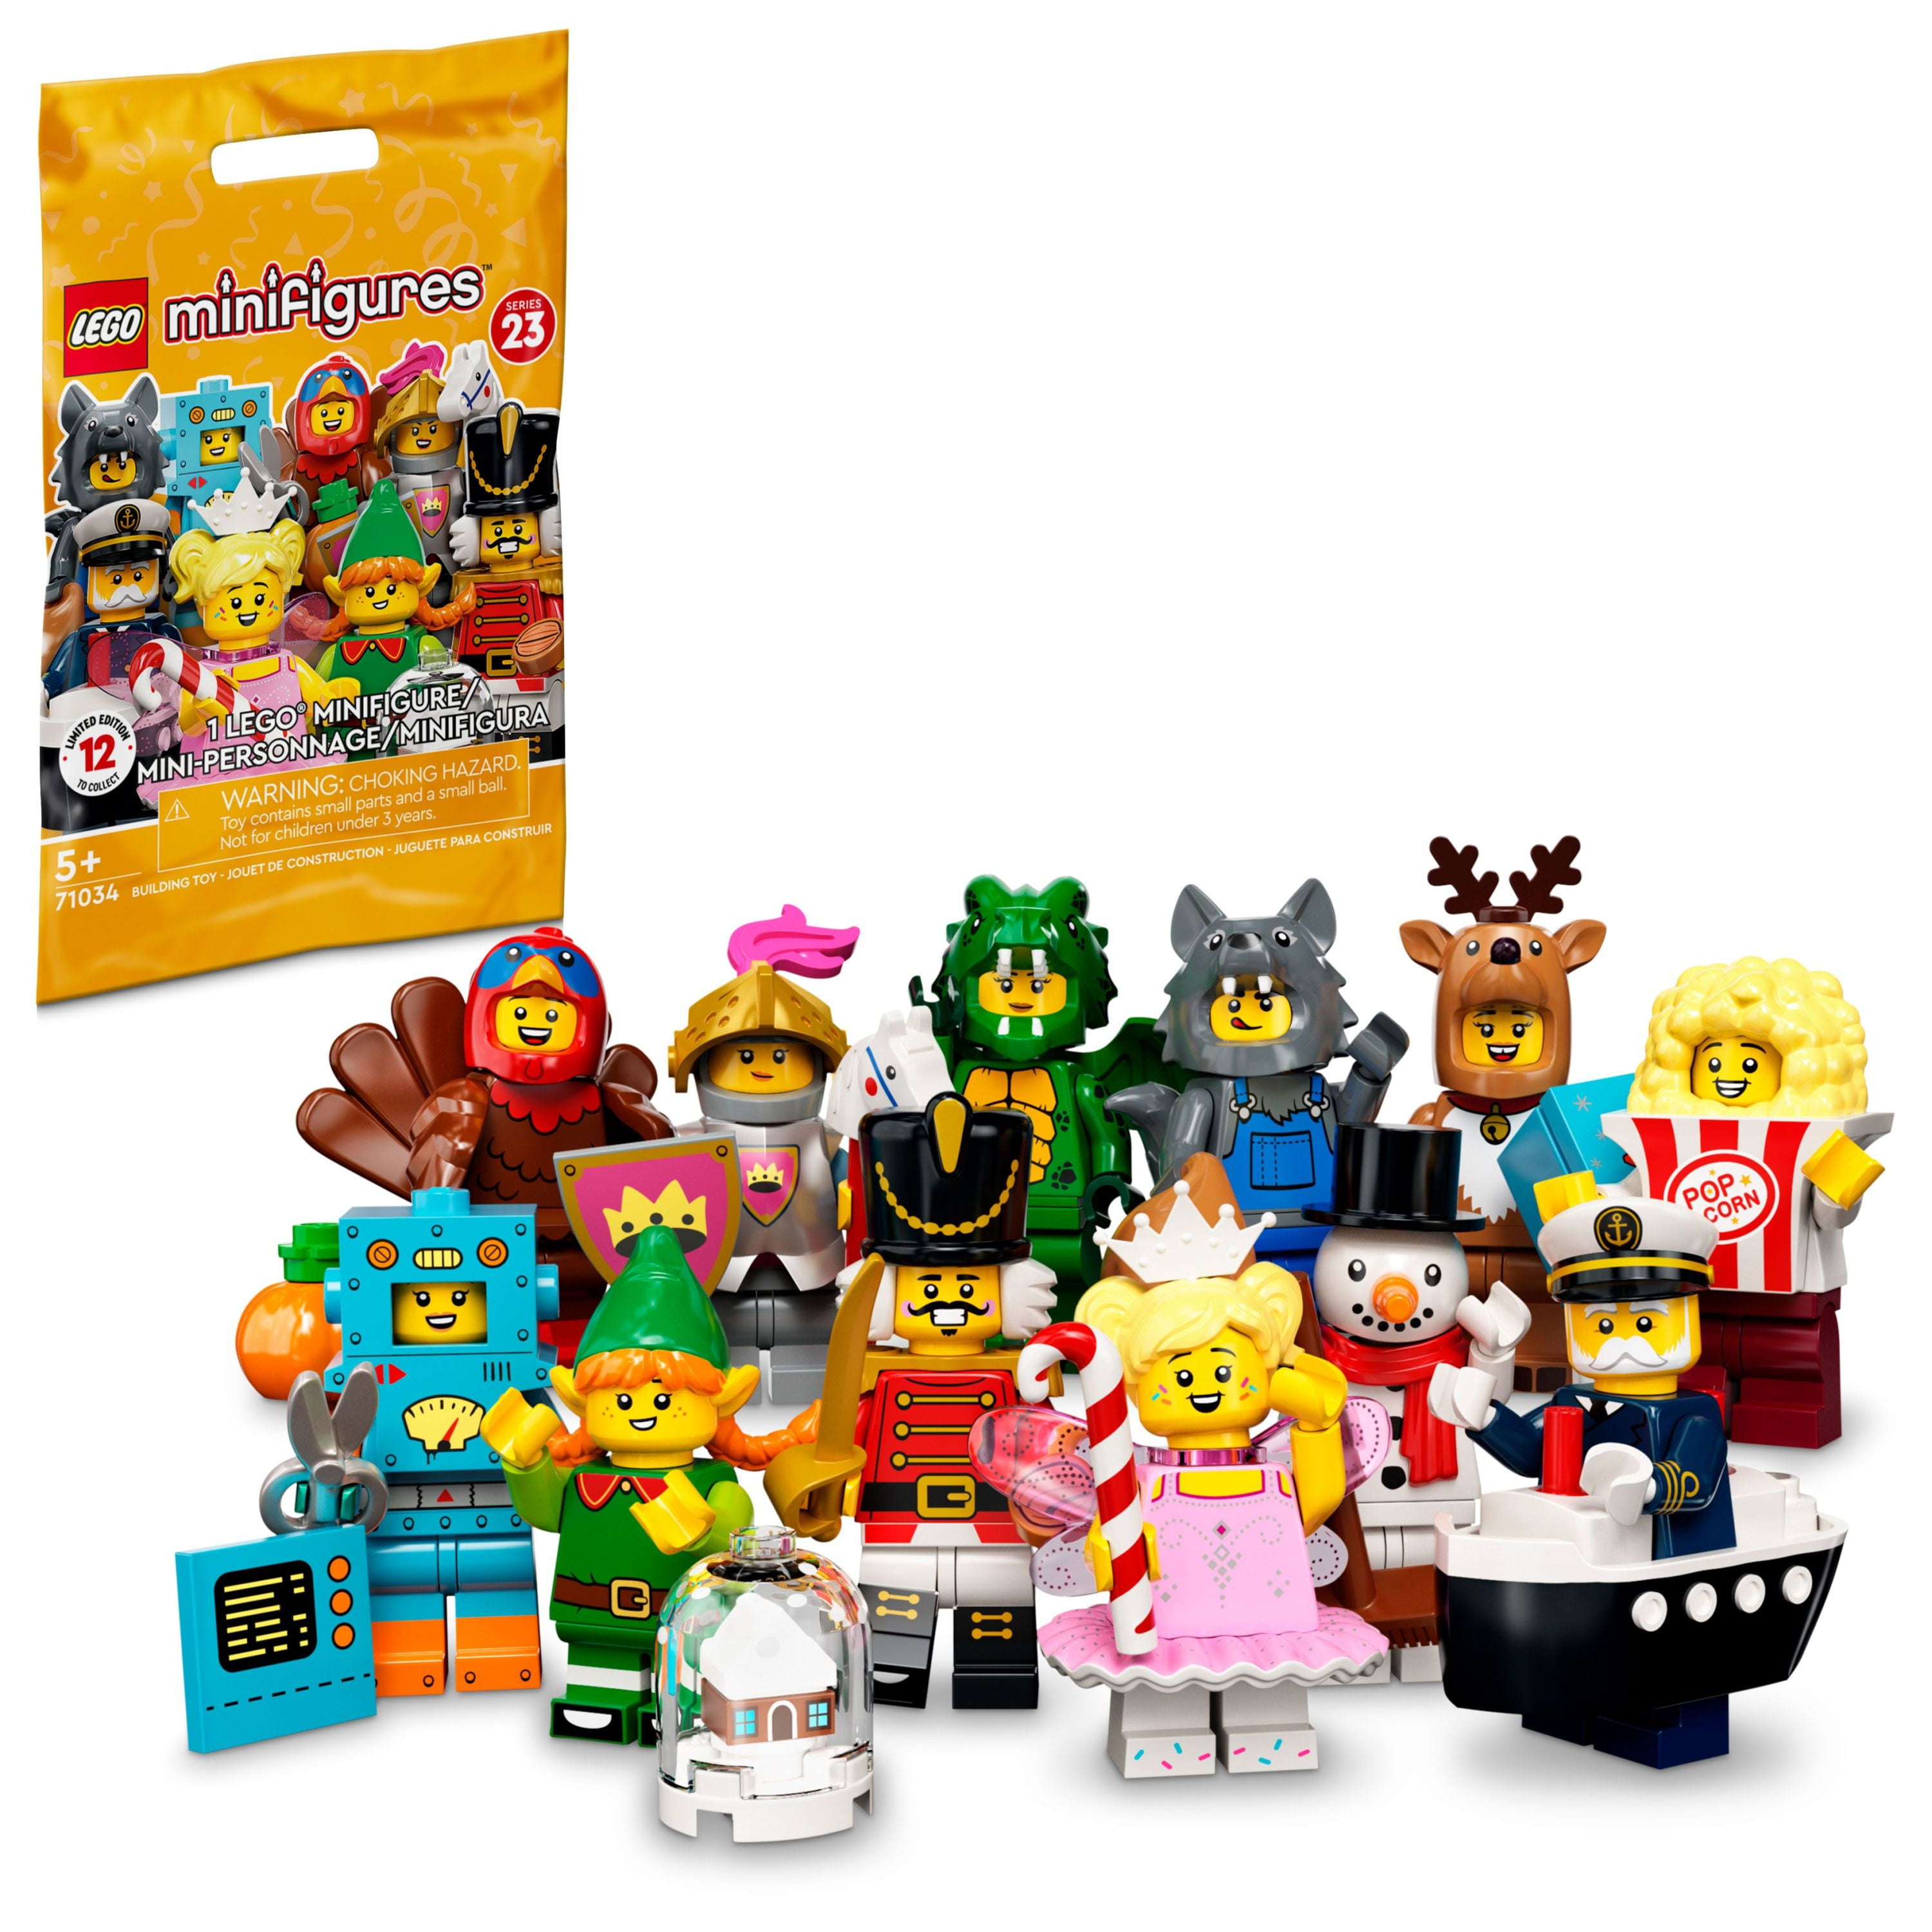 LEGO Minifigures Series 23 71034 Limited-Edition Building Toy Set (1 of 12 to collect) (One Random Pack)